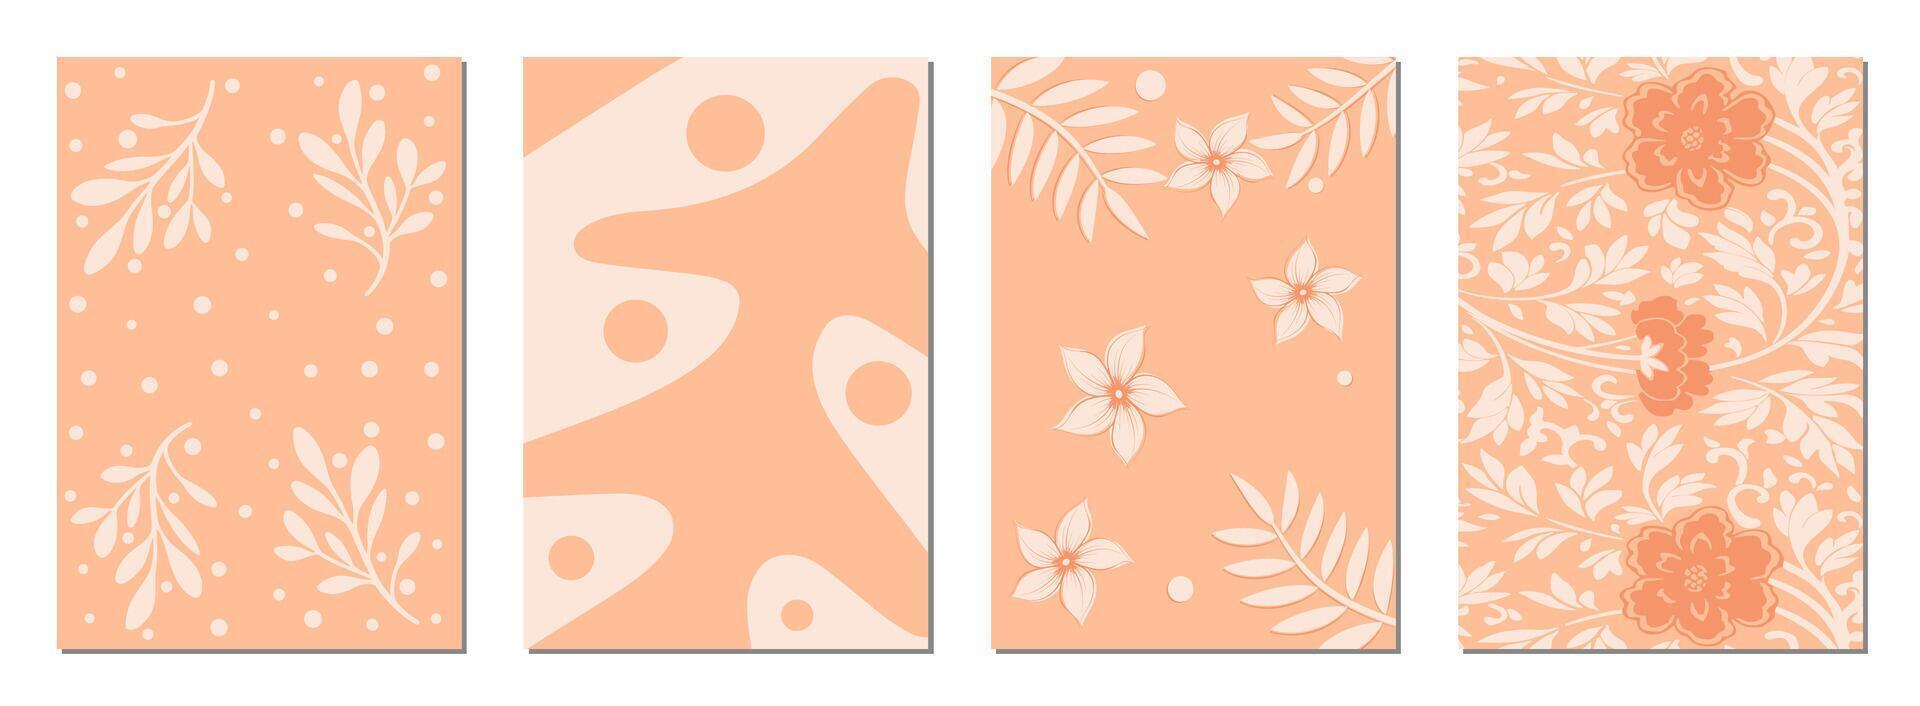 Abstract floral templates for covers of diaries, planners, notebooks, exercise books, menus, cards and other printed materials. Vector illustration.